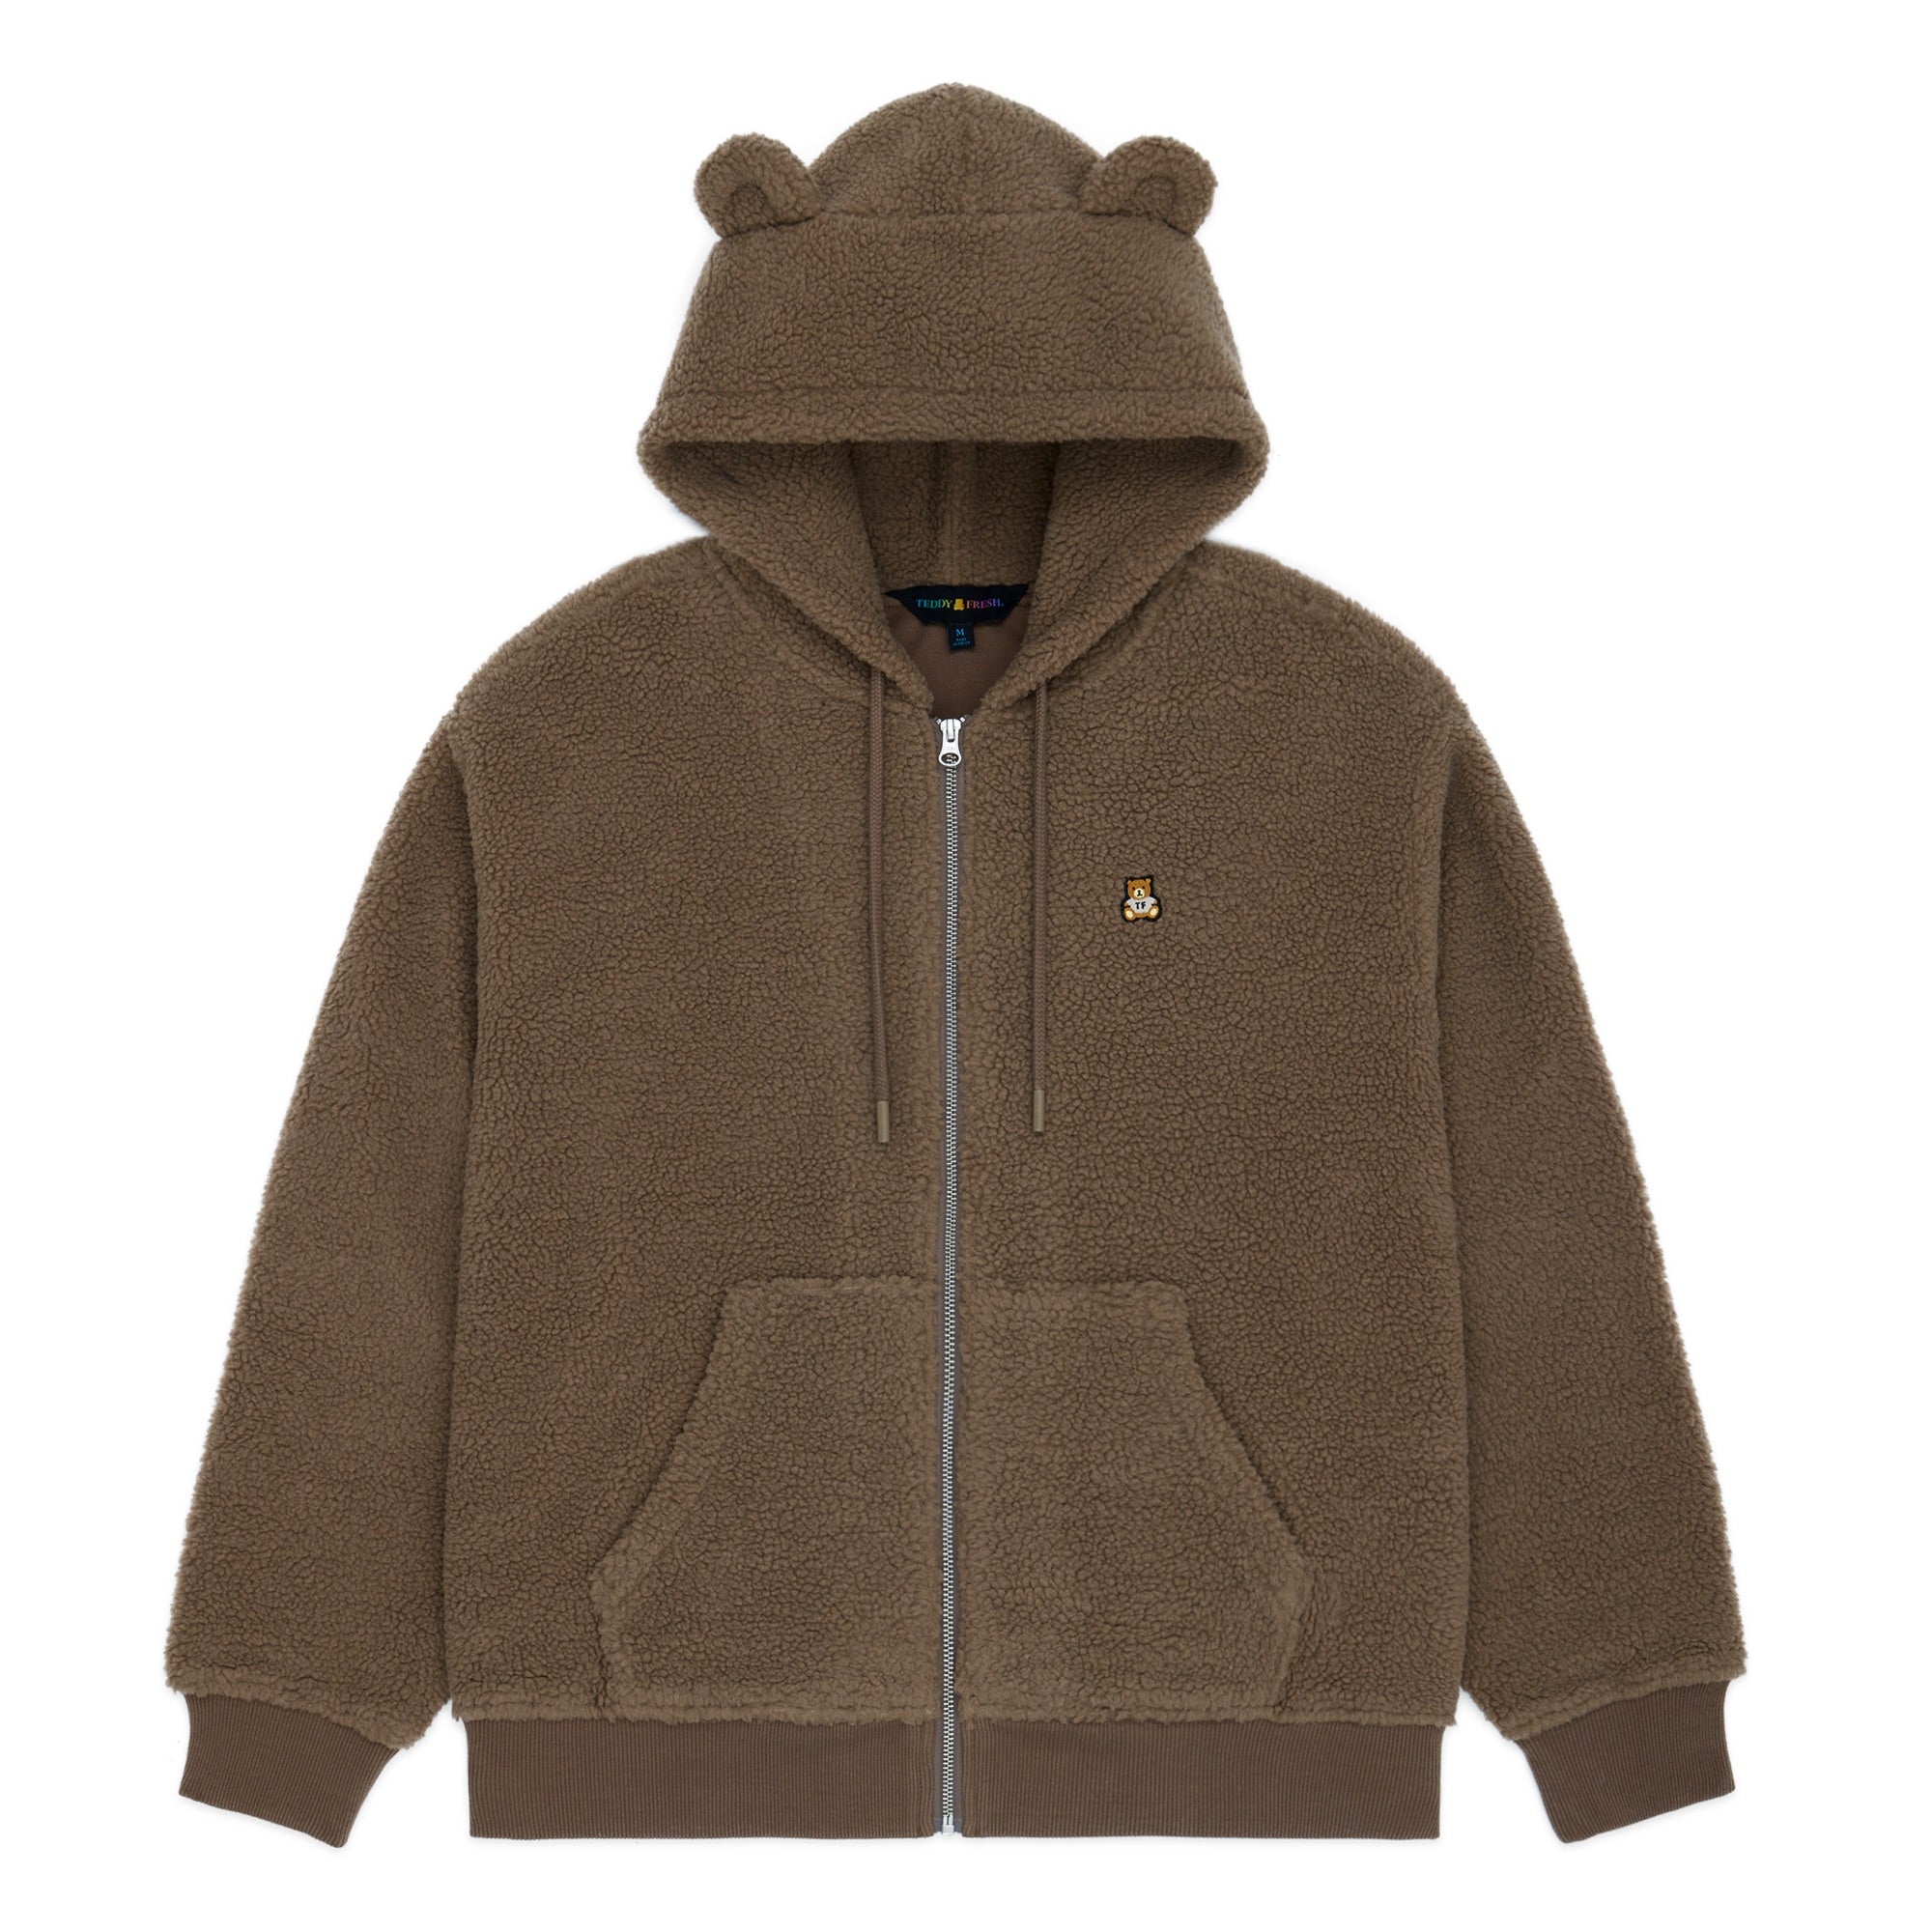 Teddy Fresh Quilted Hoodies for Men